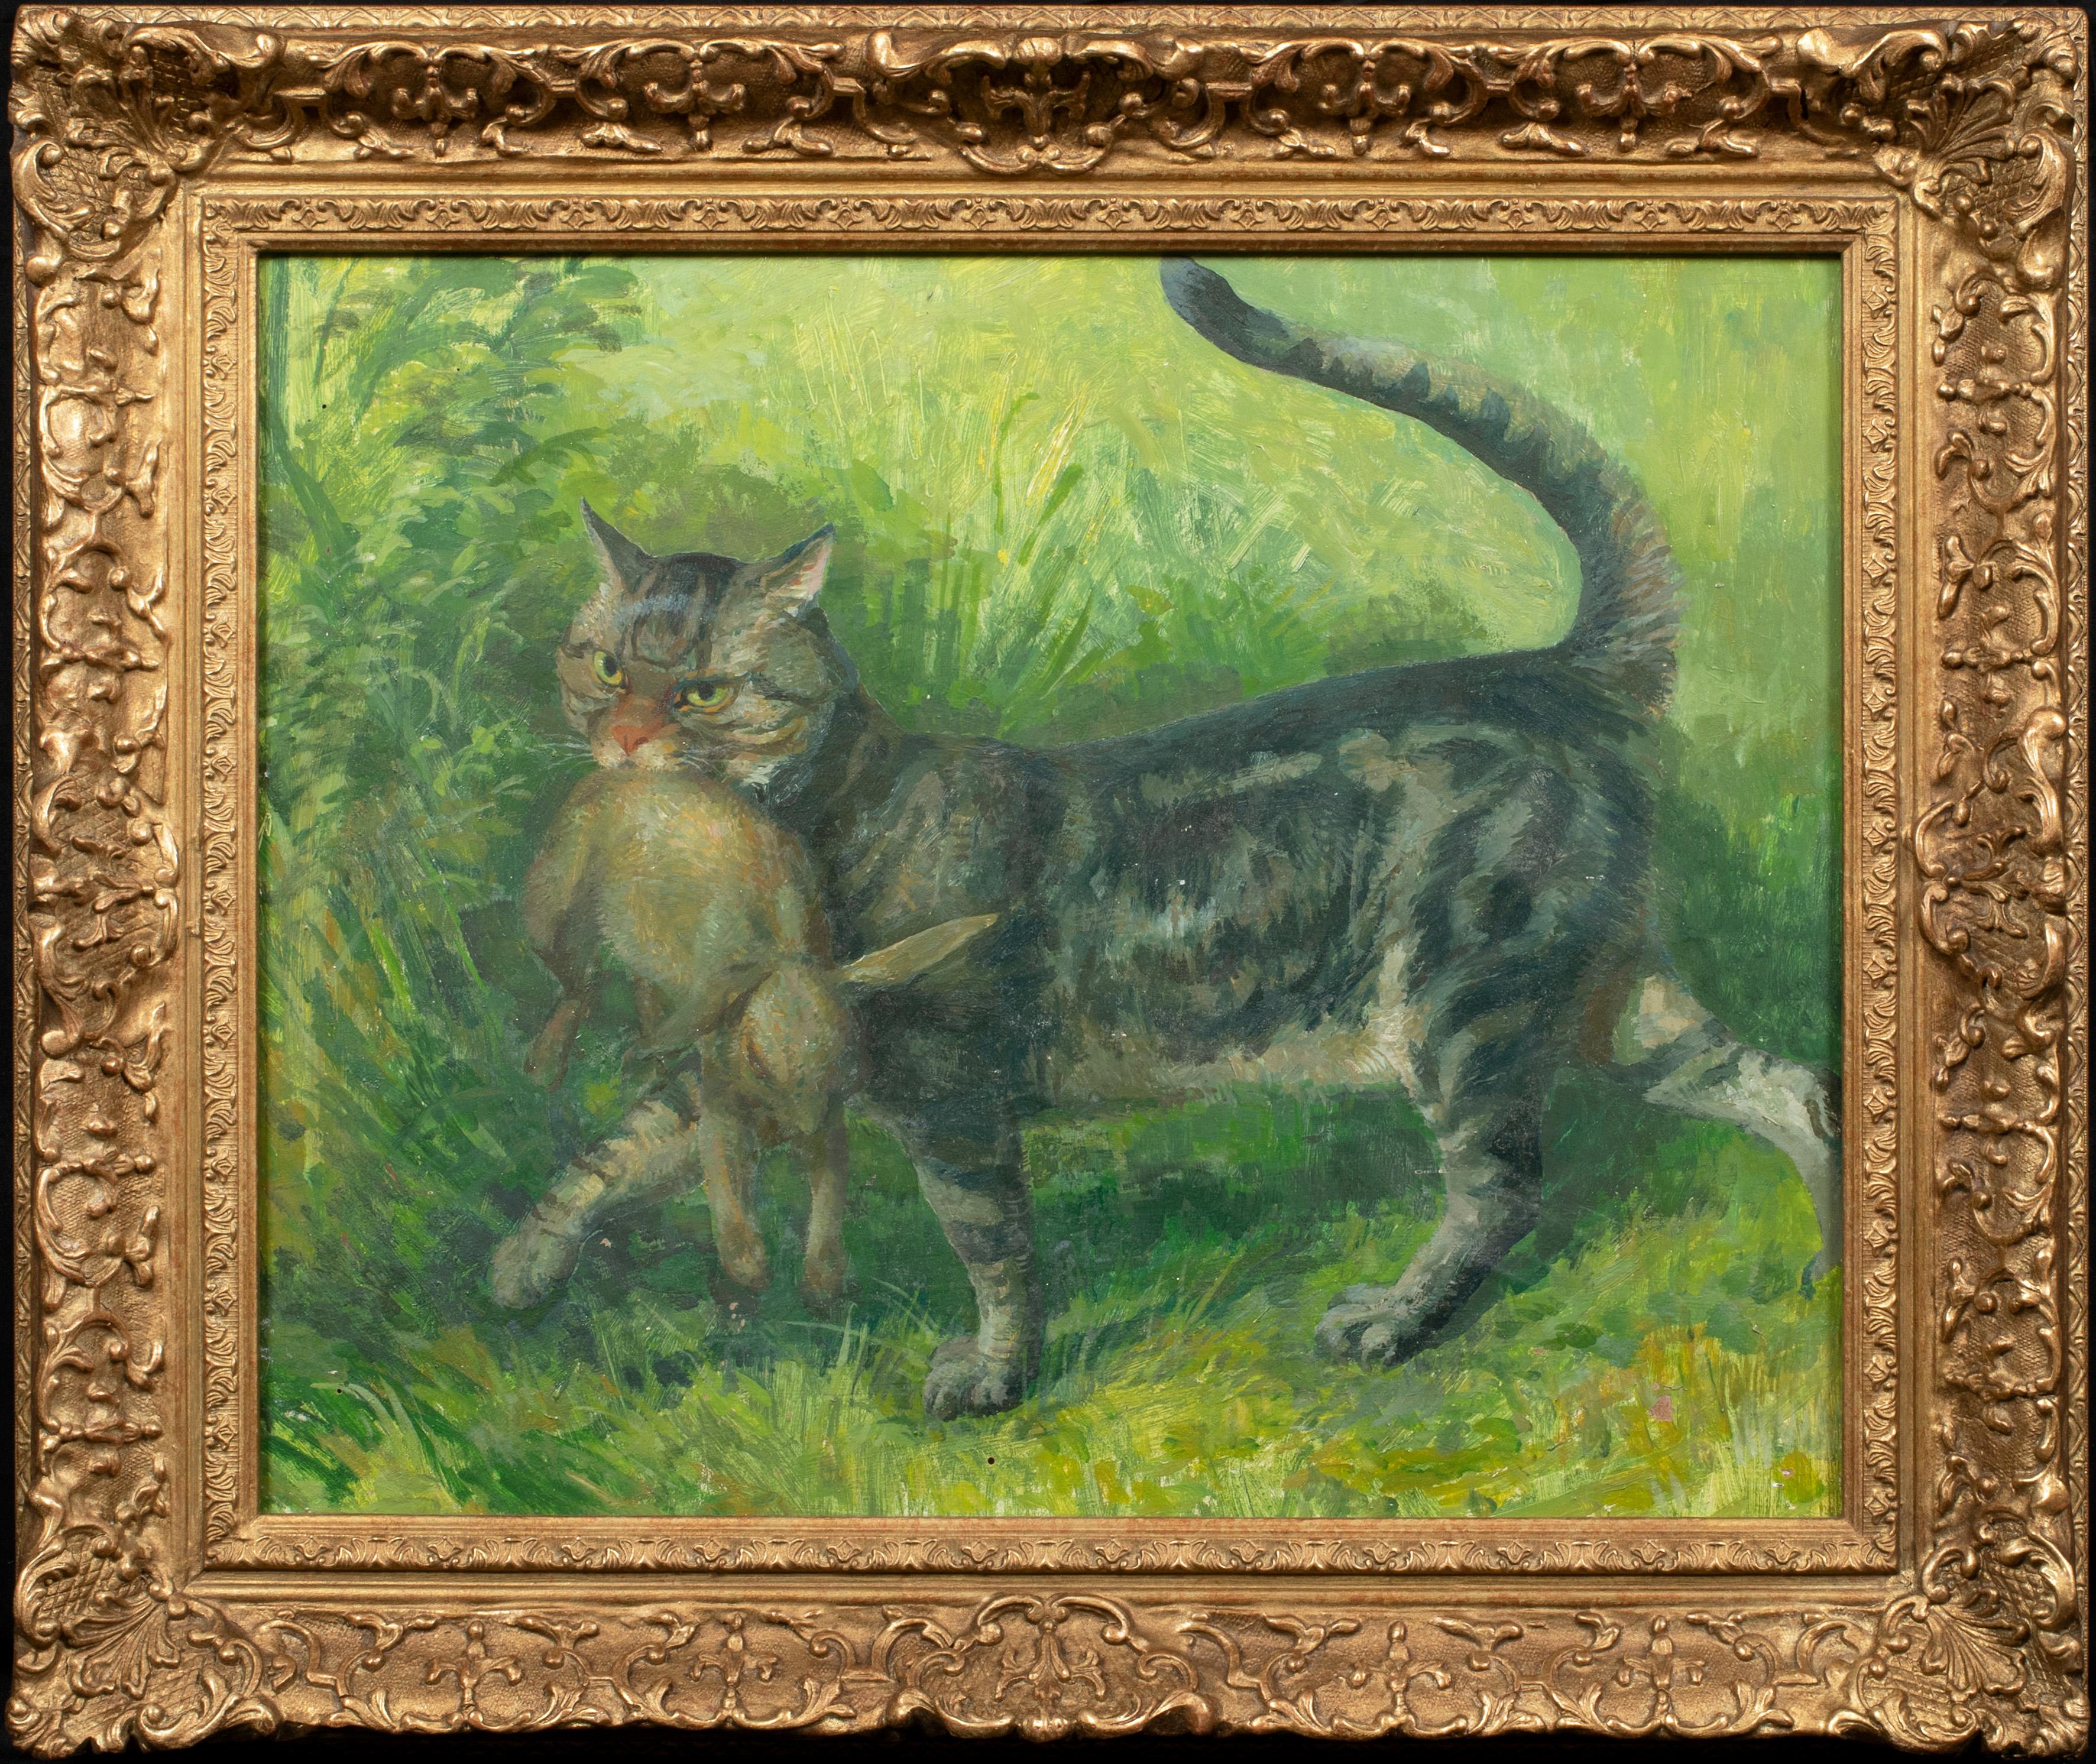 Unknown Portrait Painting - Portrait Of A Tabby Cat, early 20th Century    by Lionel Ellis ARCA (1903-1988) 